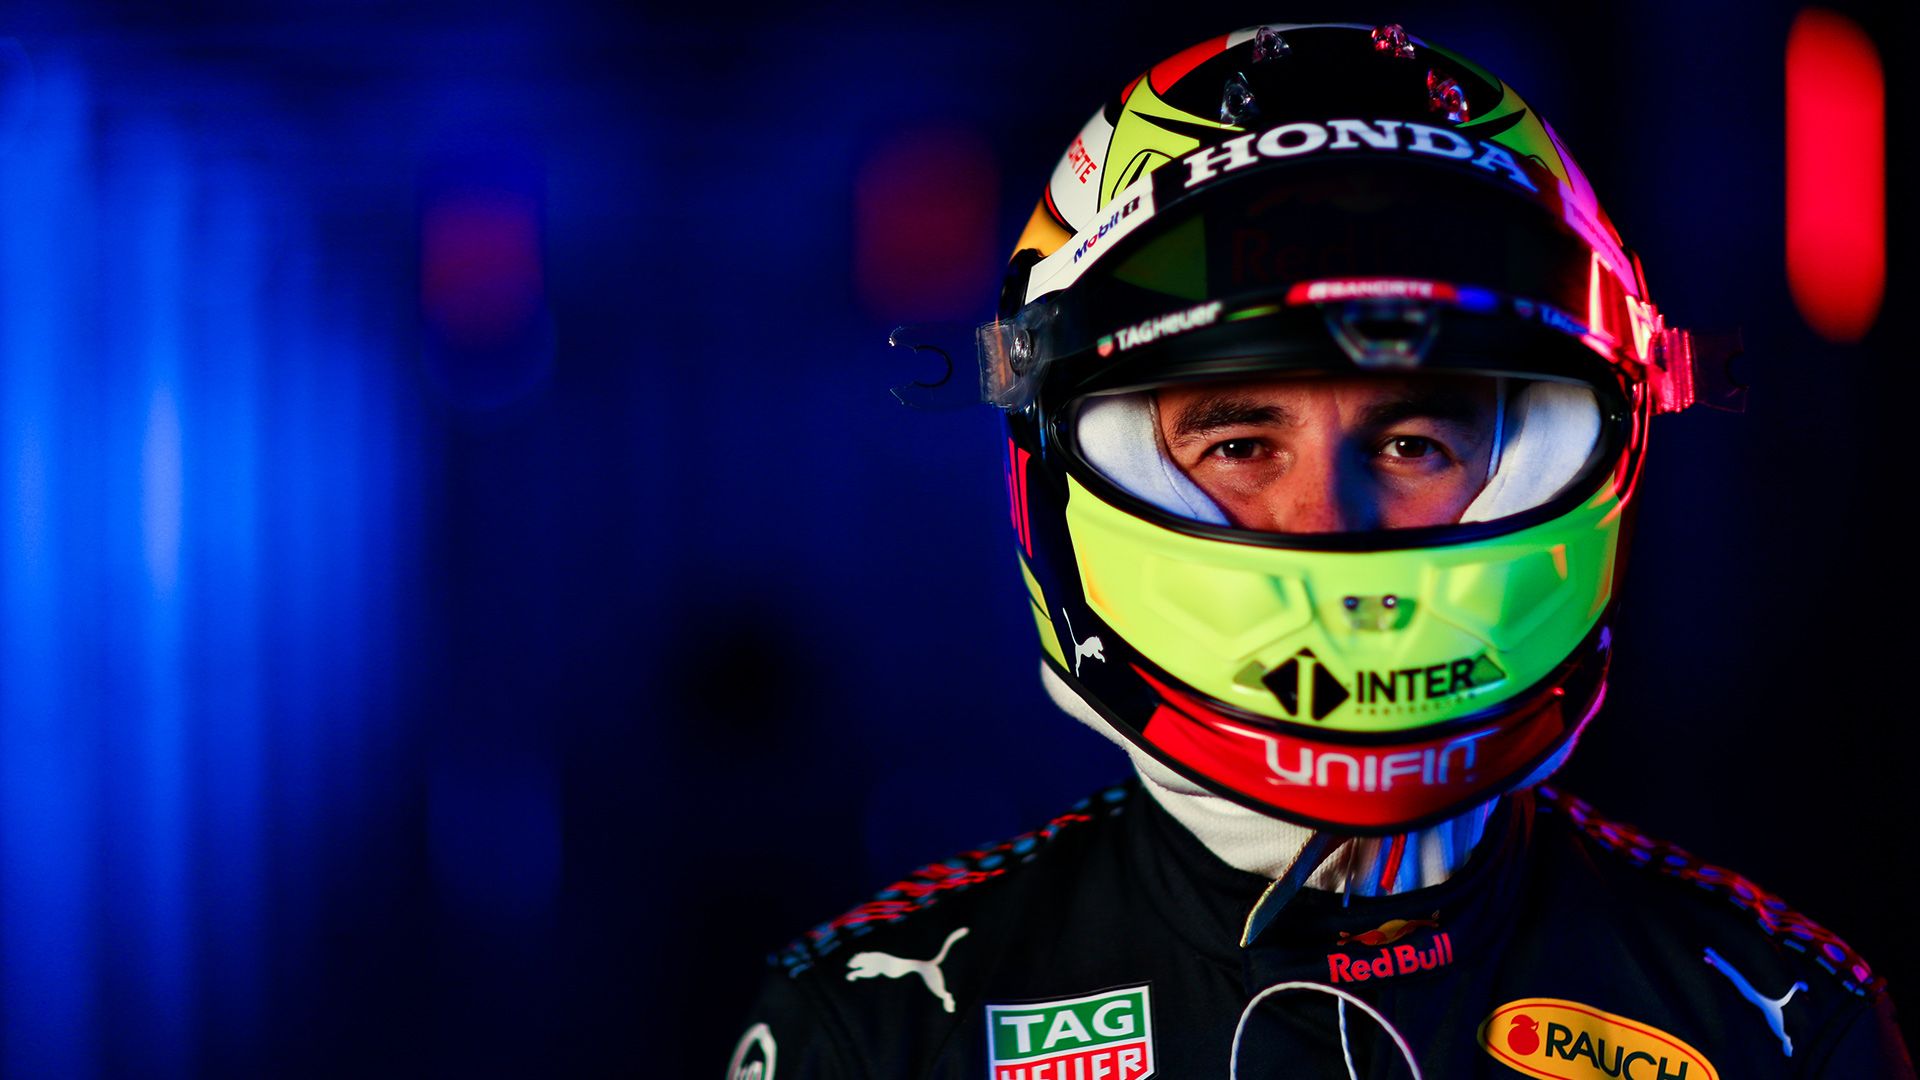 Sergio Perez looking to give Mercedes 'a hard time' in 2021 after first Red Bull test. Formula 1®